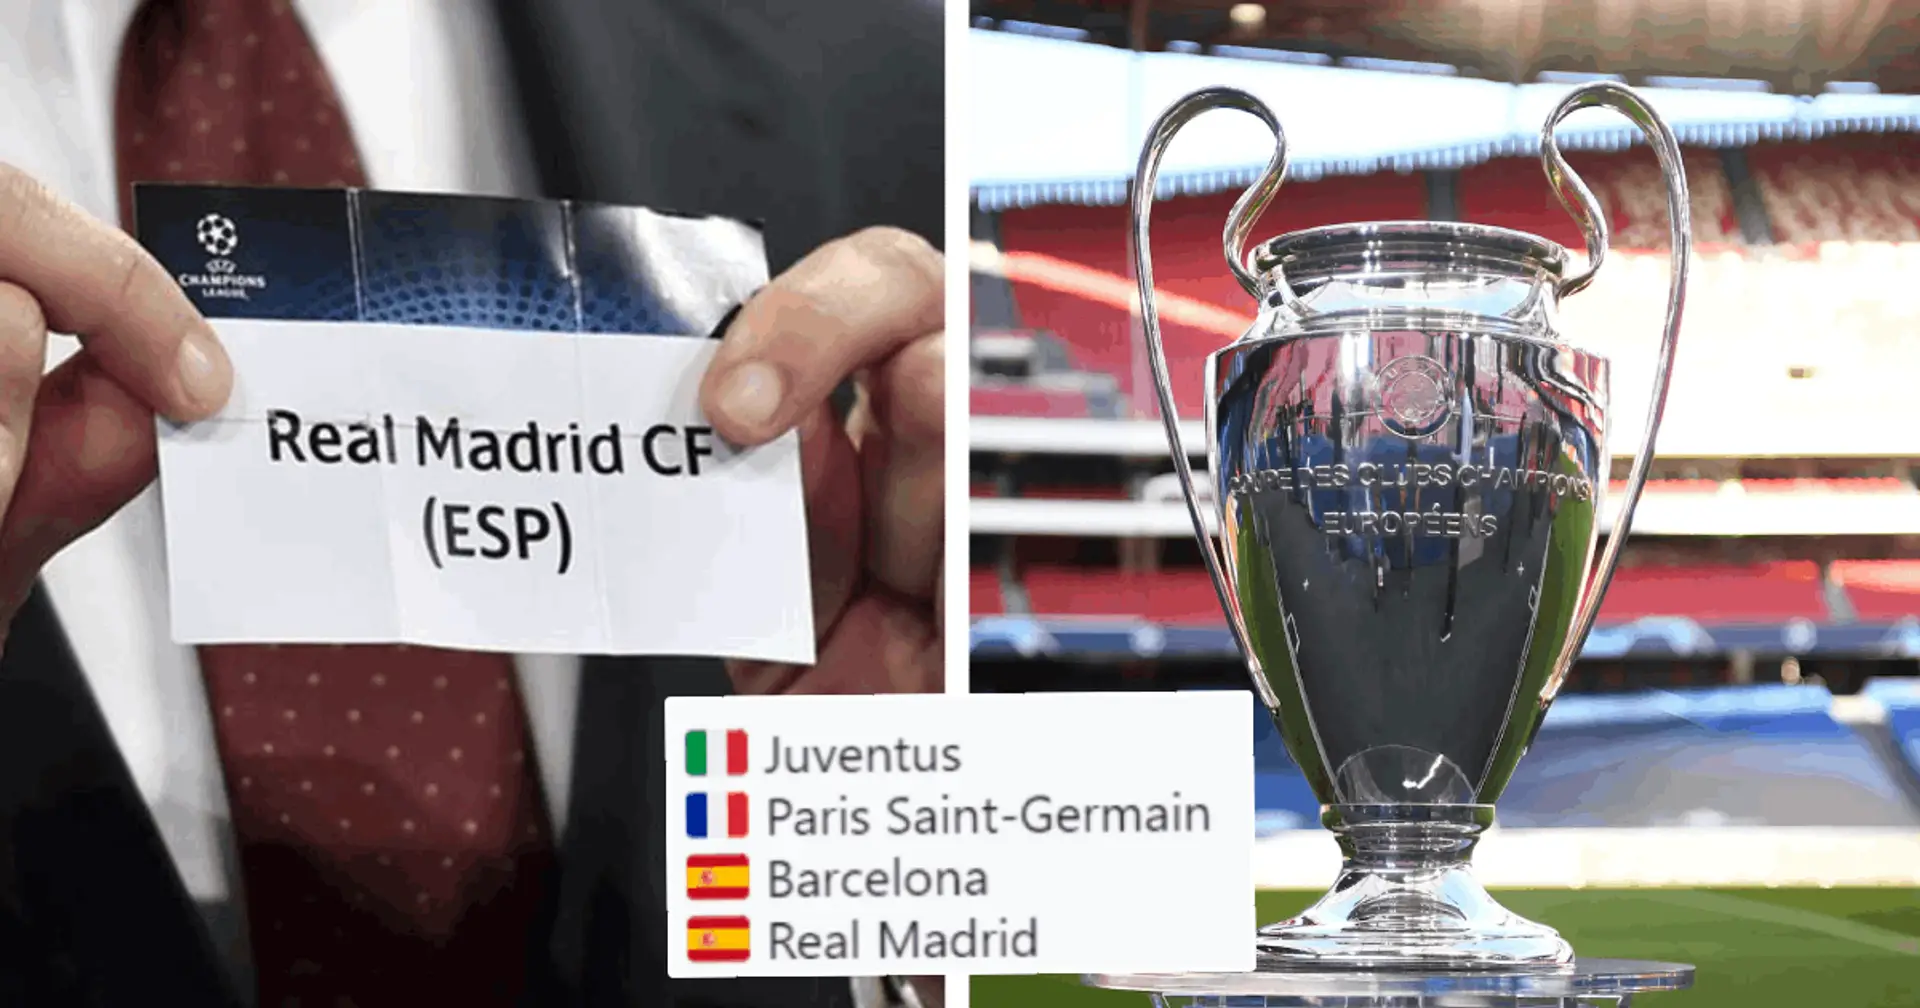 Champions League pots updated after Chelsea's win over City – Real Madrid might now face them in group stage